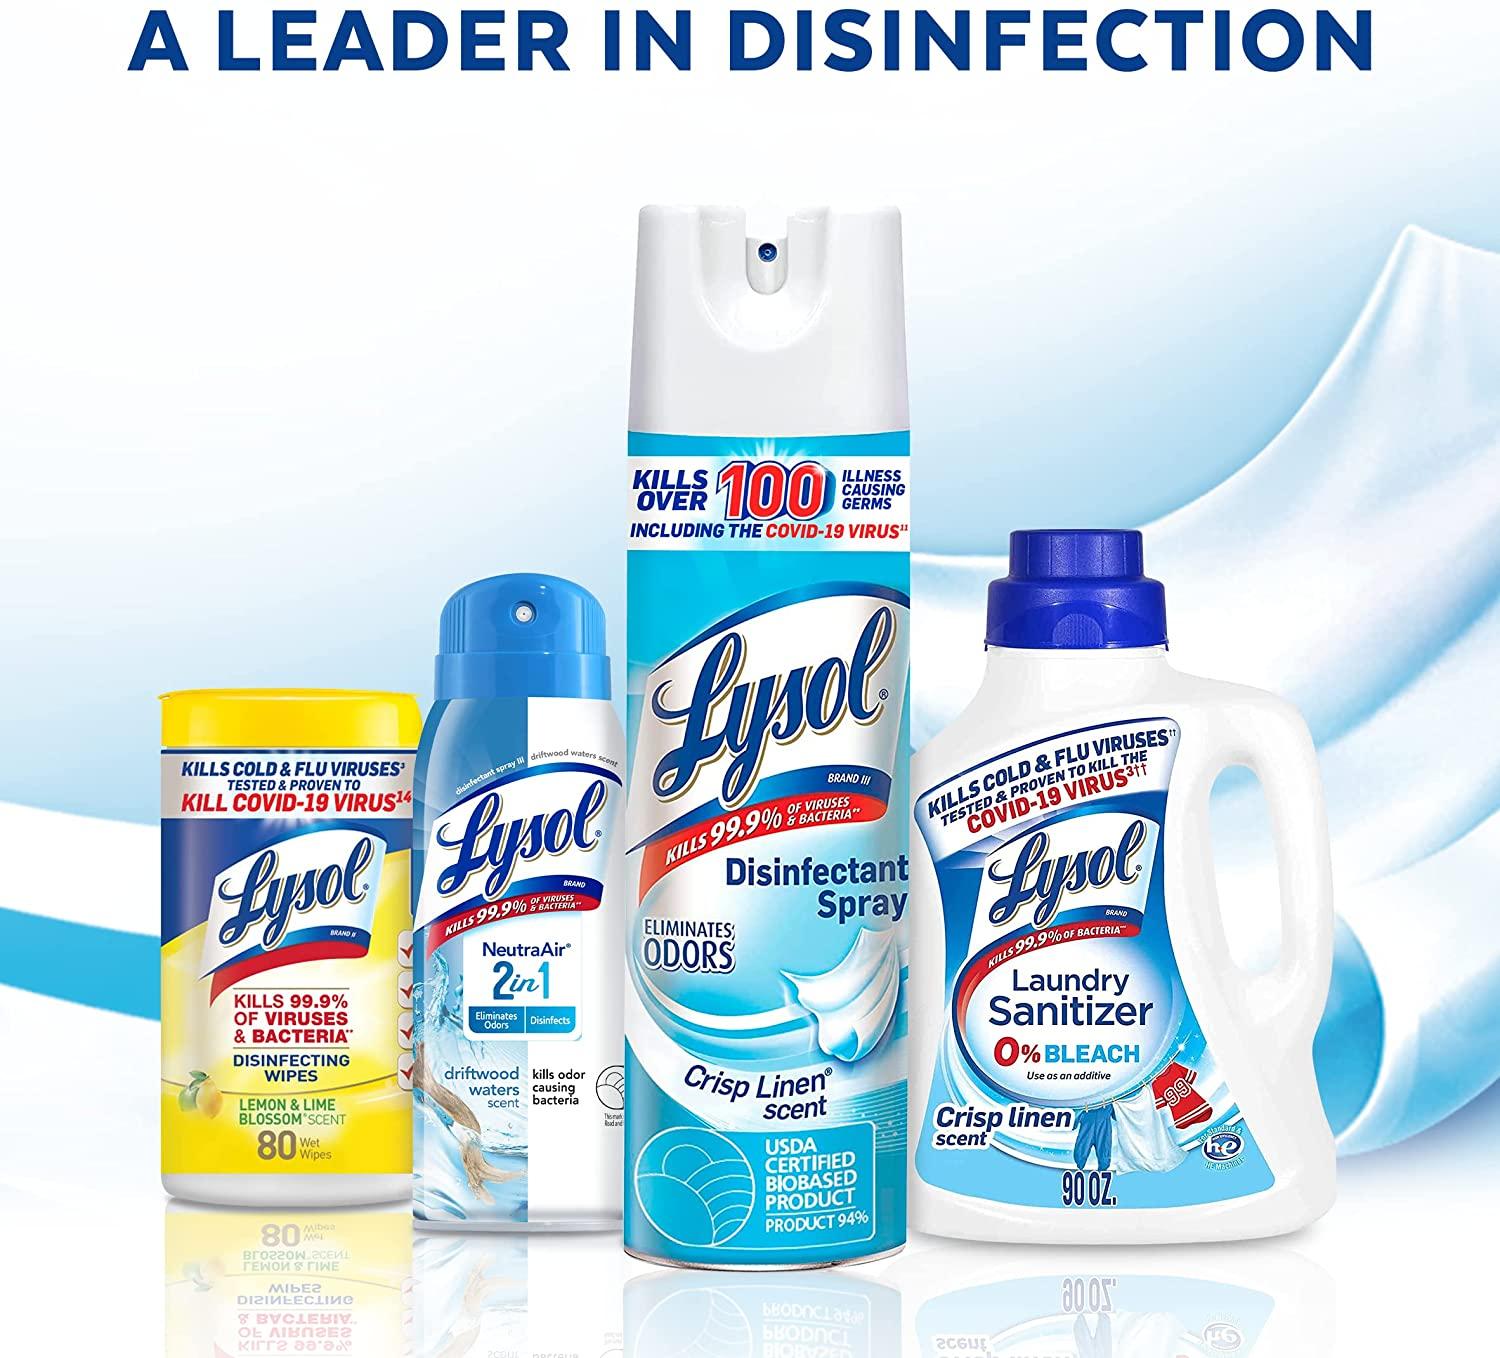 Lysol Disinfectant Spray, Sanitizing and Antibacterial Spray, For Disinfecting and Deodorizing, Early Morning Breeze, 3 Count, 19 fl oz each